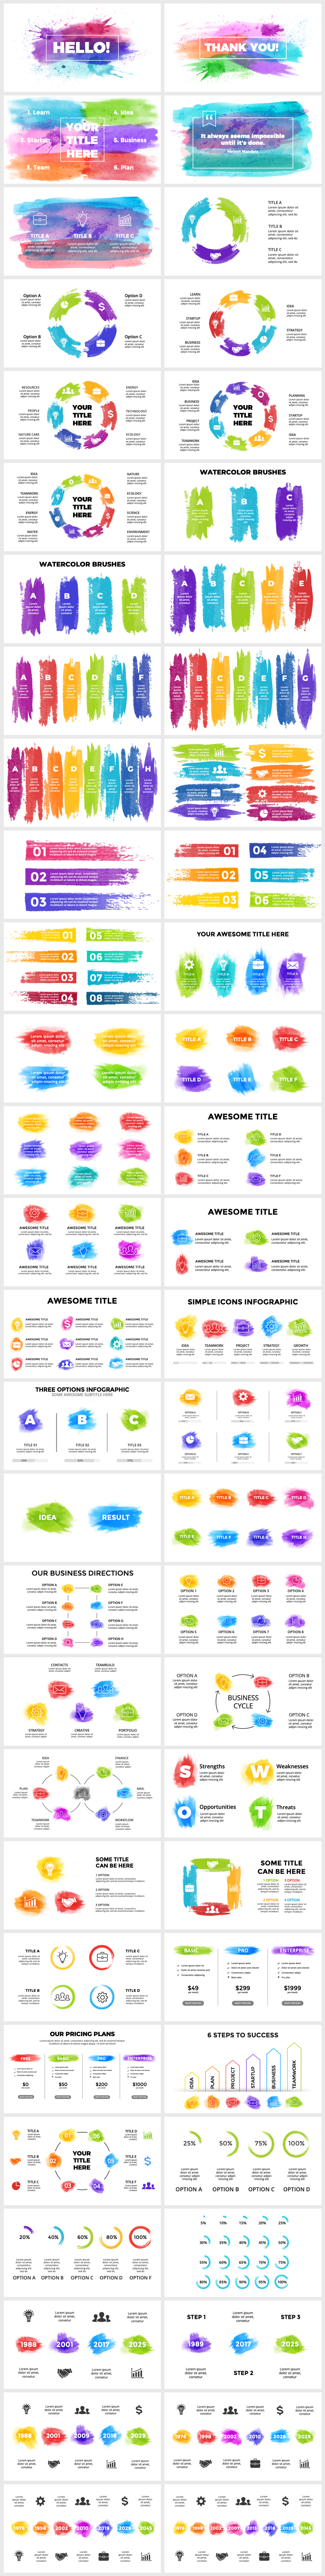 Wowly - 3500 Infographics & Presentation Templates! Updated! PowerPoint Canva Figma Sketch Ai Psd. - 289